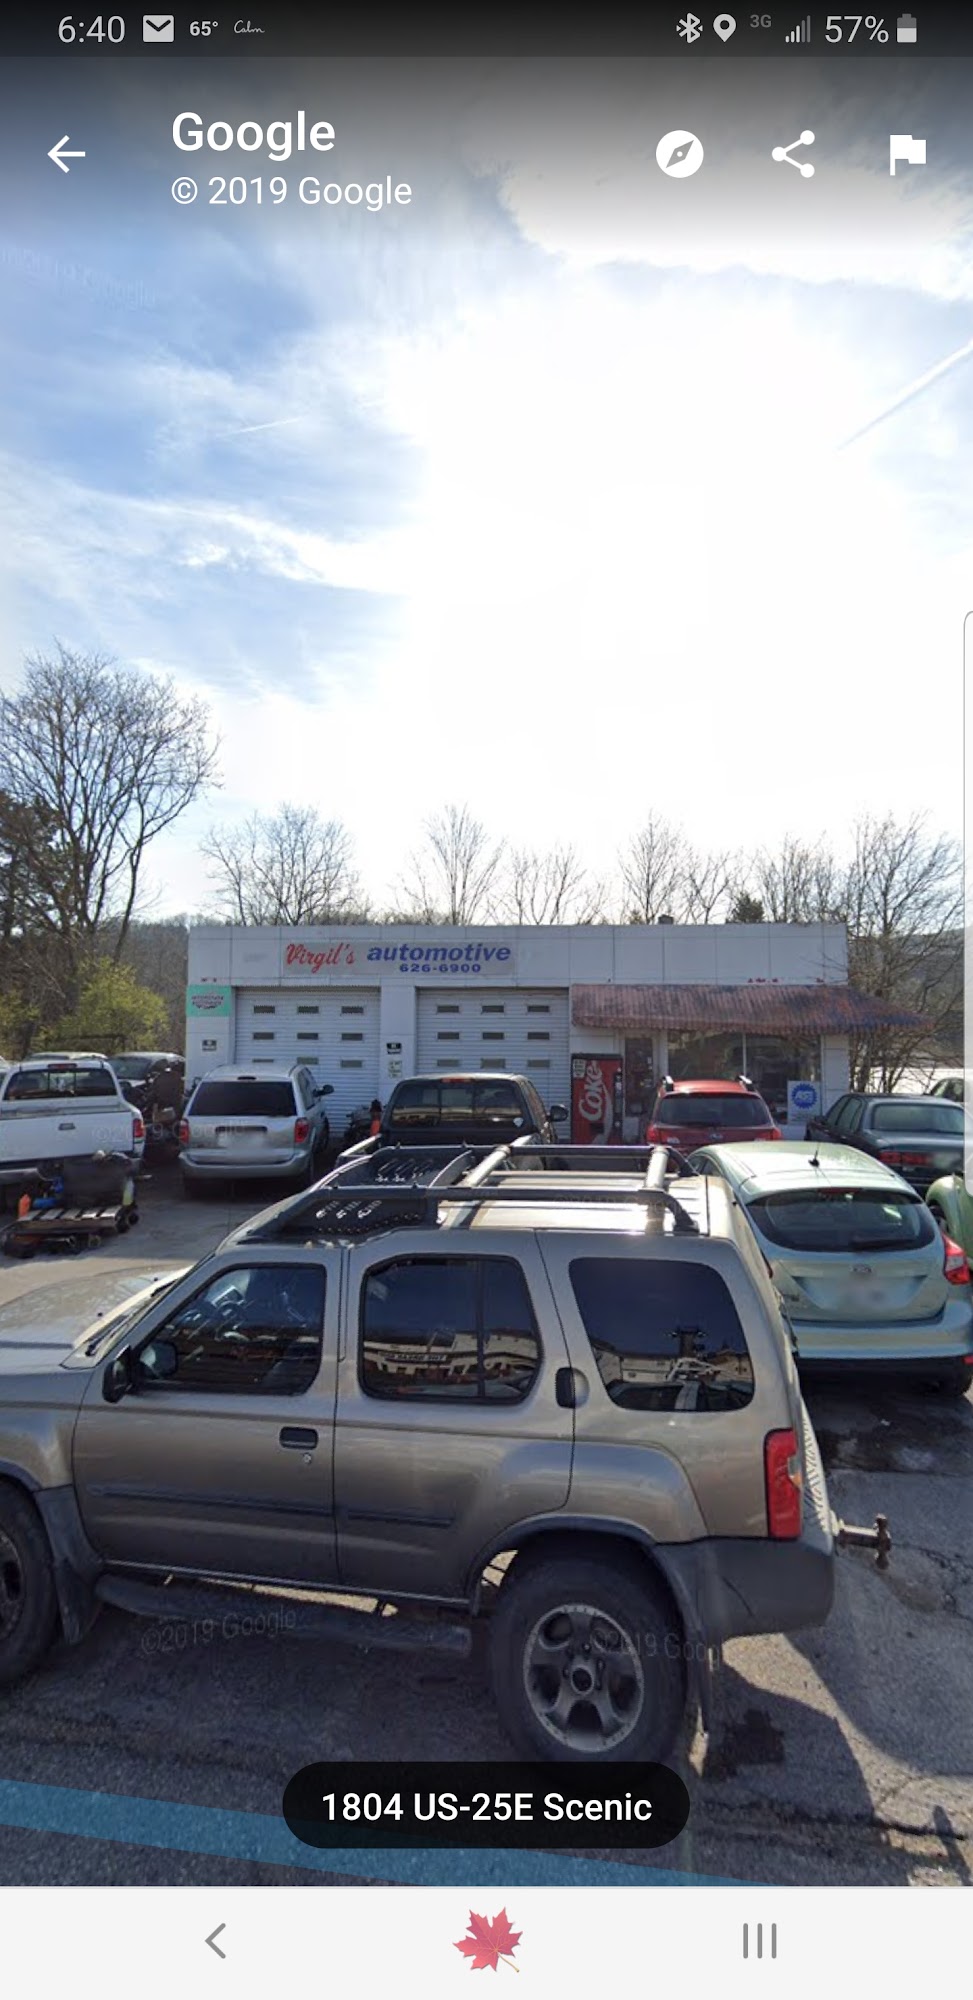 Virgil's Automotive 1804 N Broad St, Tazewell Tennessee 37879